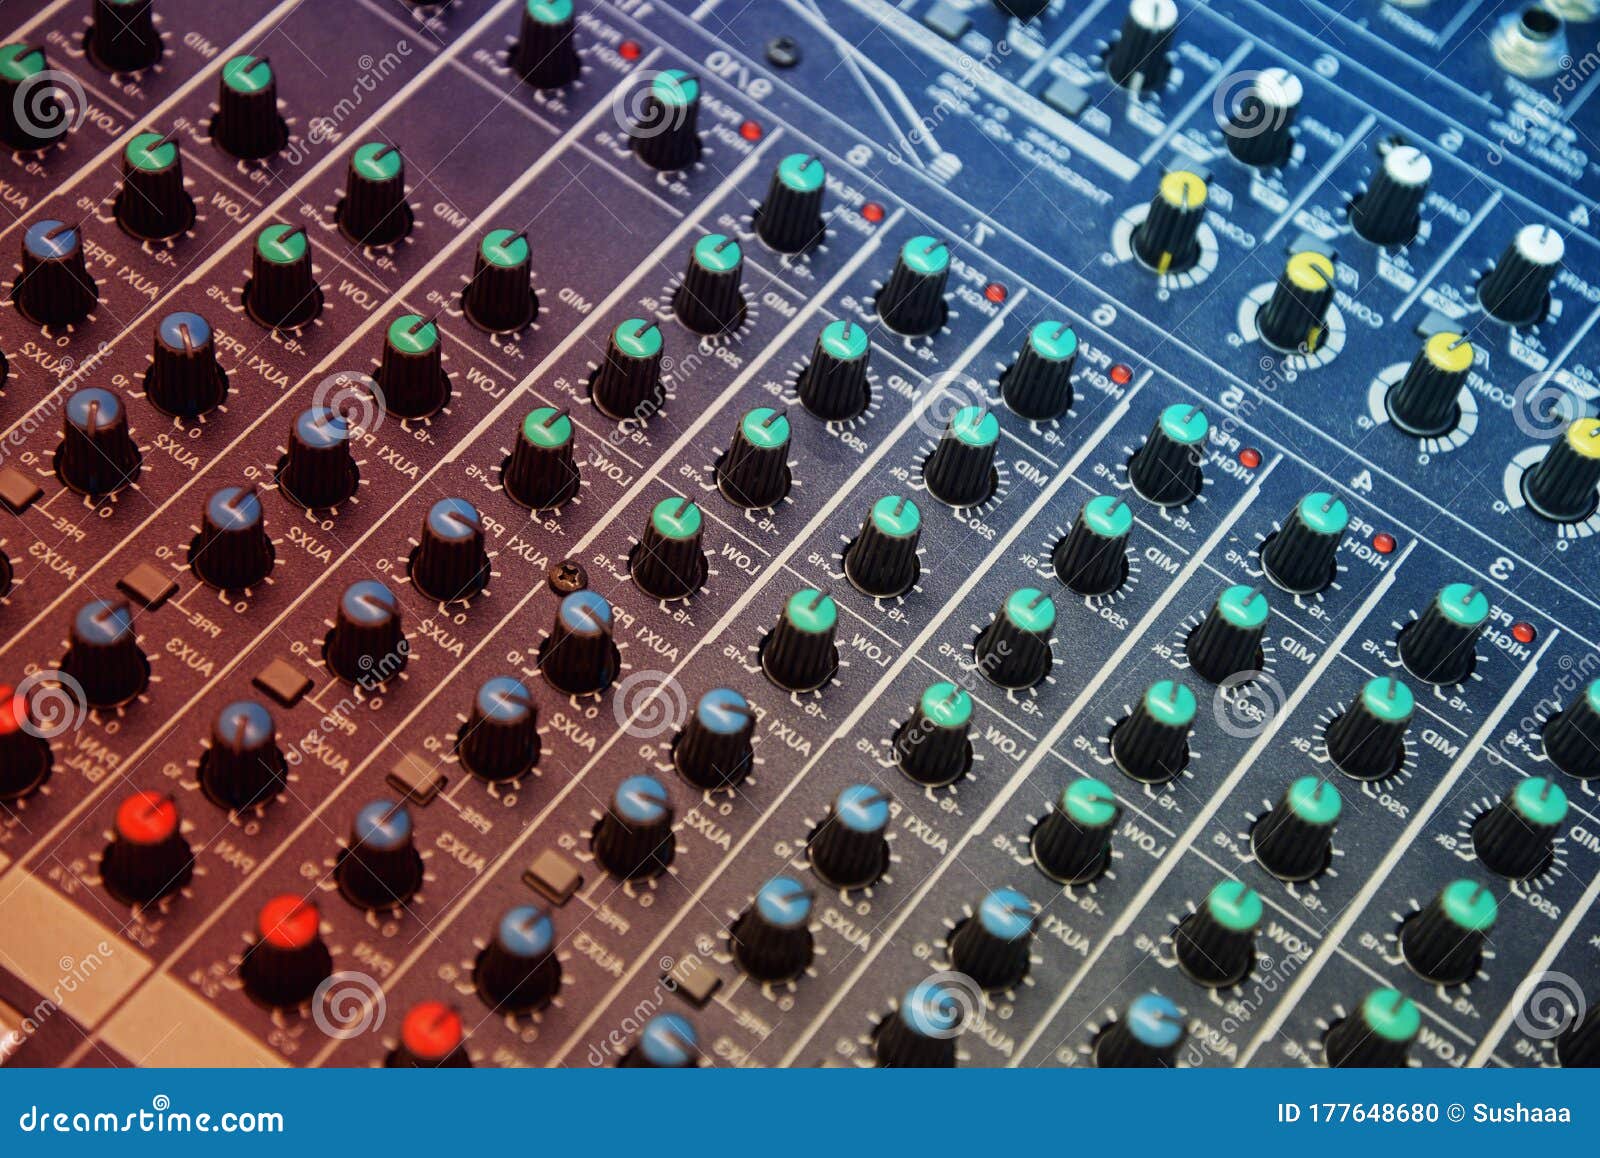 Sound Mixer Background. Close Up of Slider on Professional Sound Mixer.  Stock Photo - Image of electronic, musician: 177648680